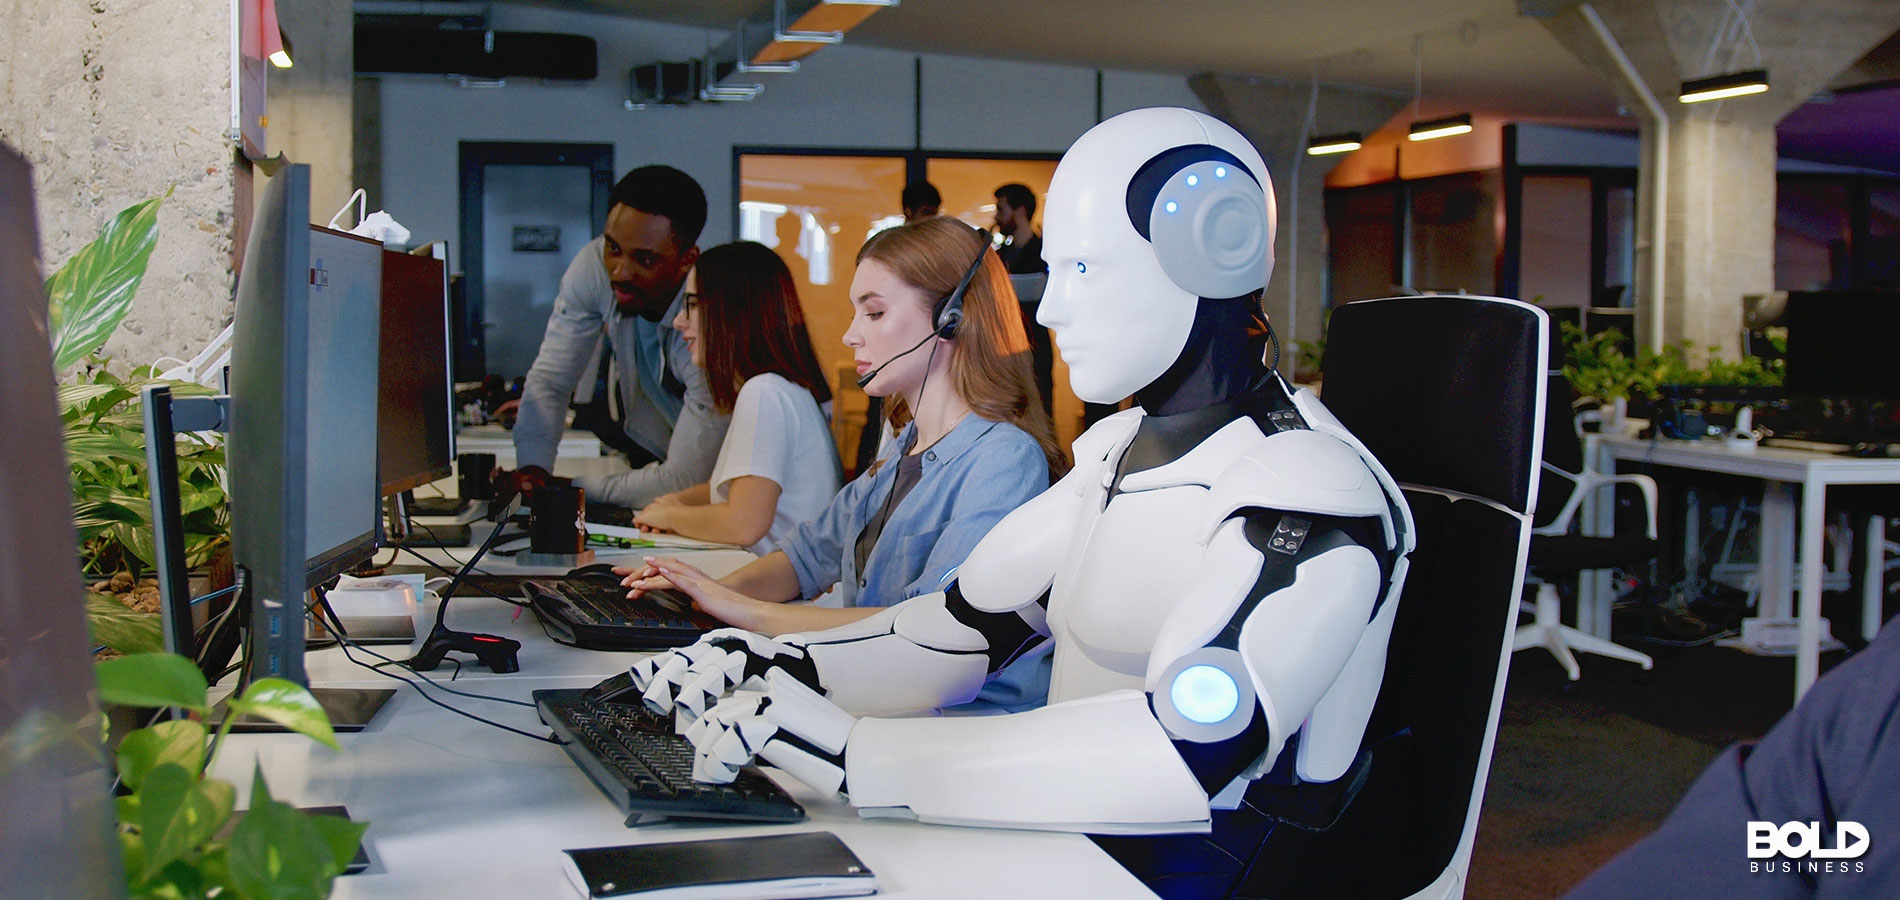 live call answering service vs. robot